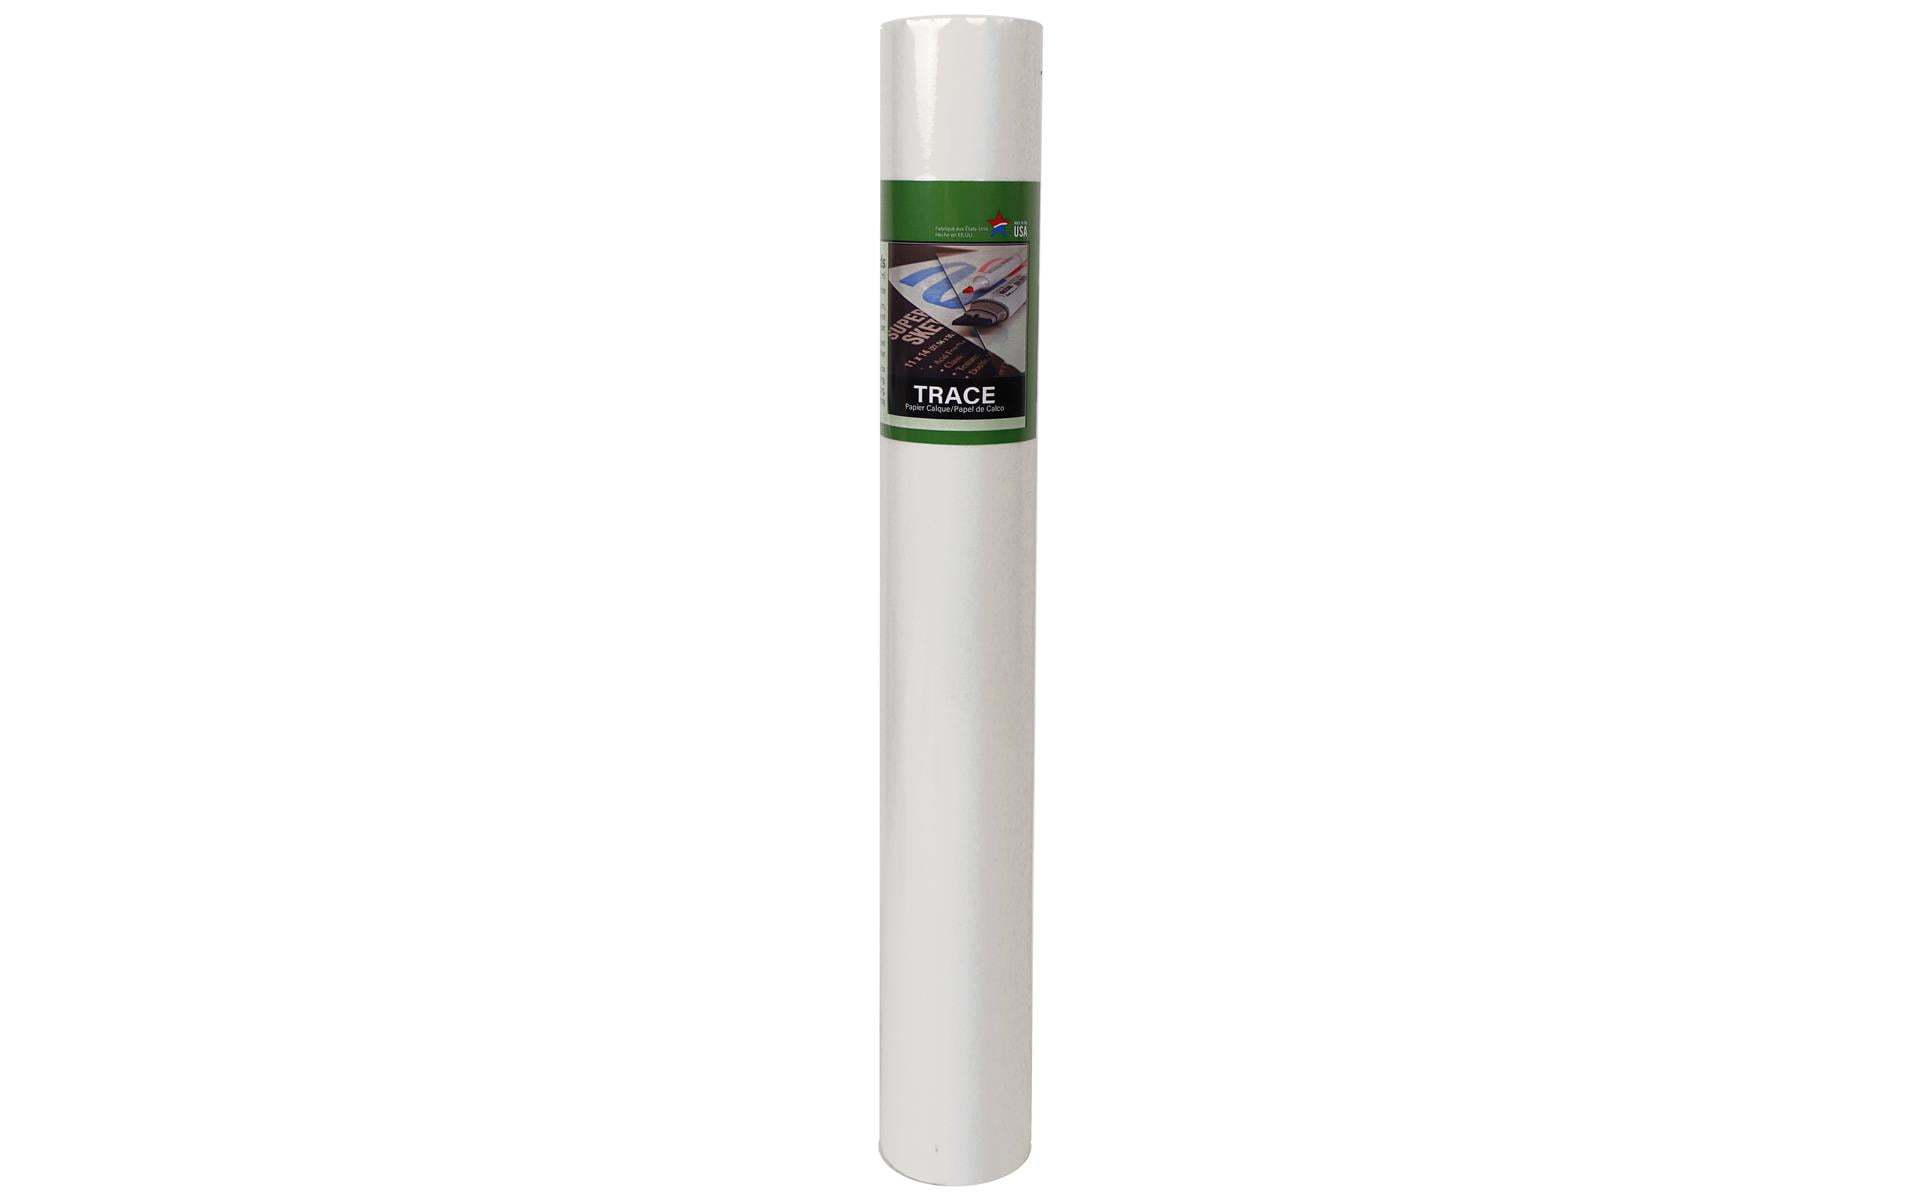 Helix - Sketch & Tracing Paper Roll - 18 Inch by 50 Yards - Transparent